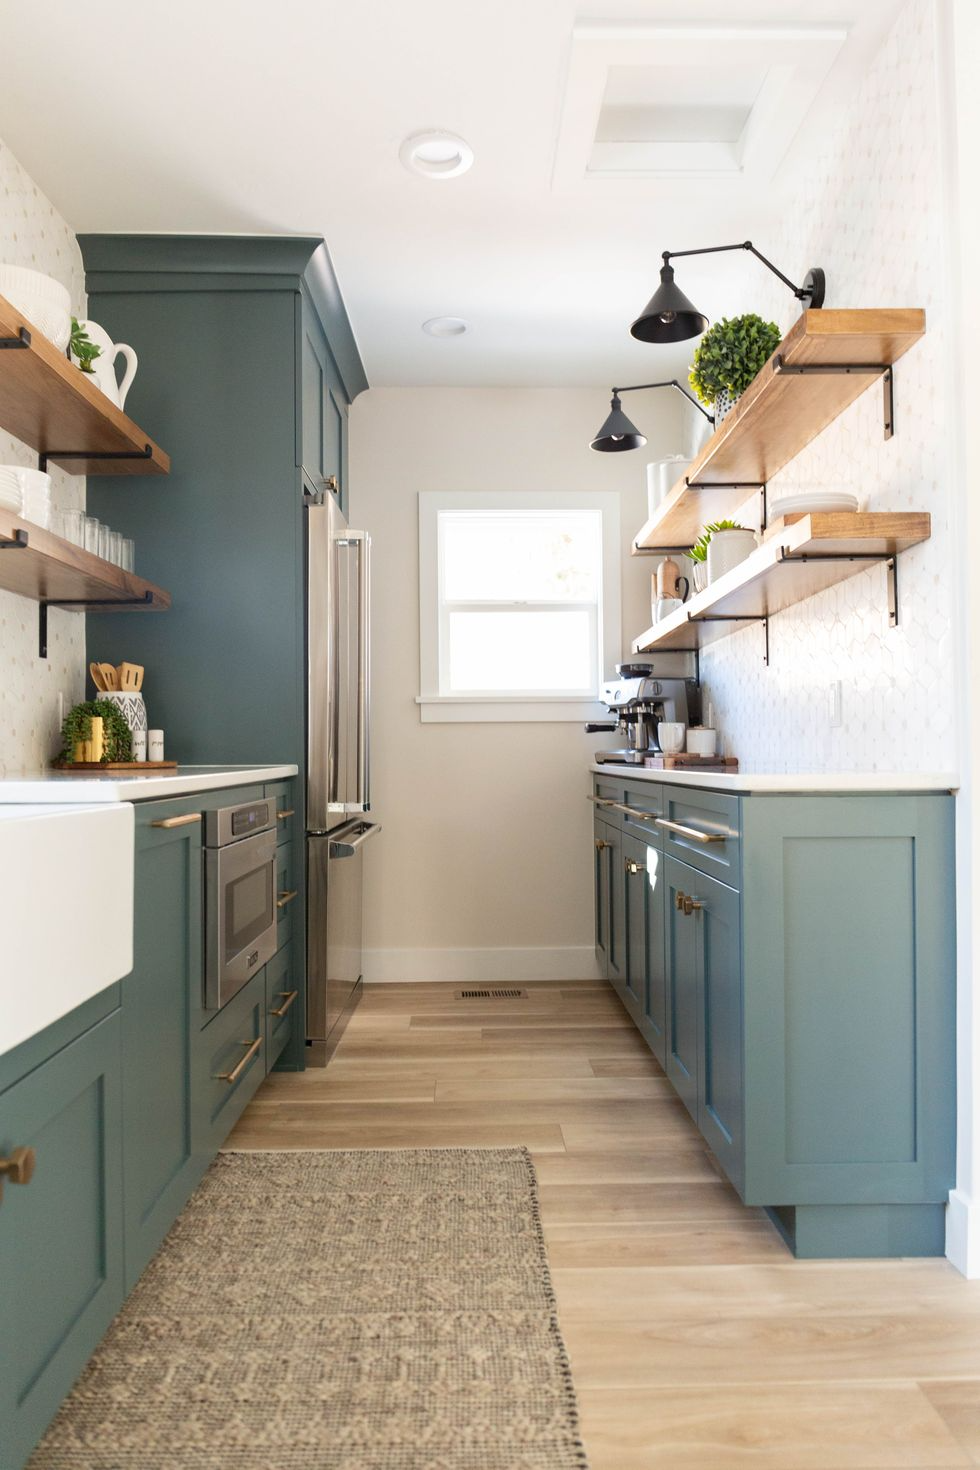 Maximizing Space: Clever Narrow Kitchen Design Ideas